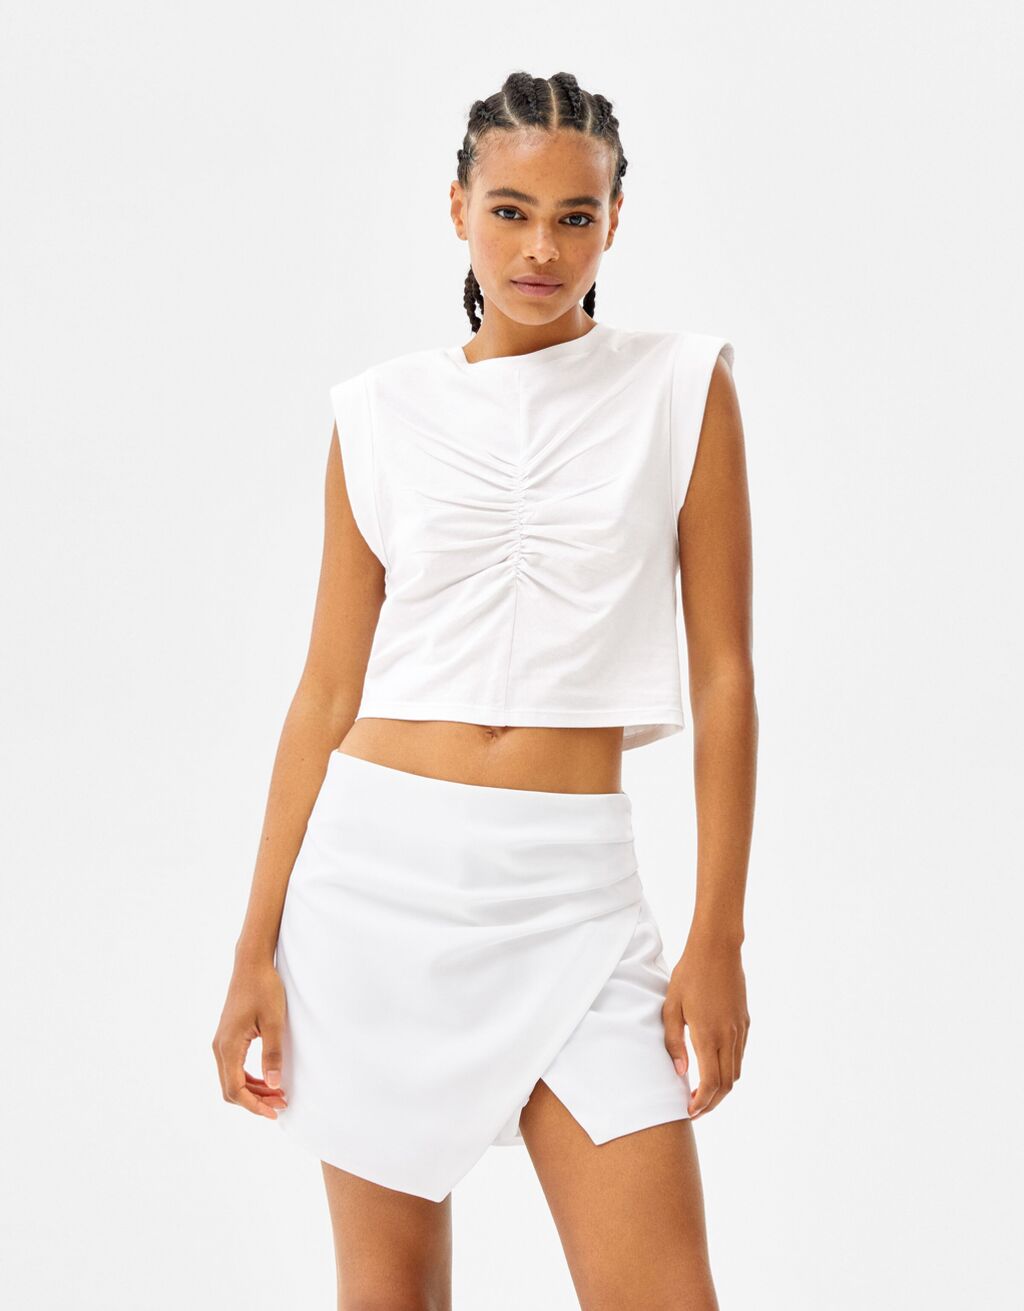 Sleeveless T-shirt with seam detail and front pleat